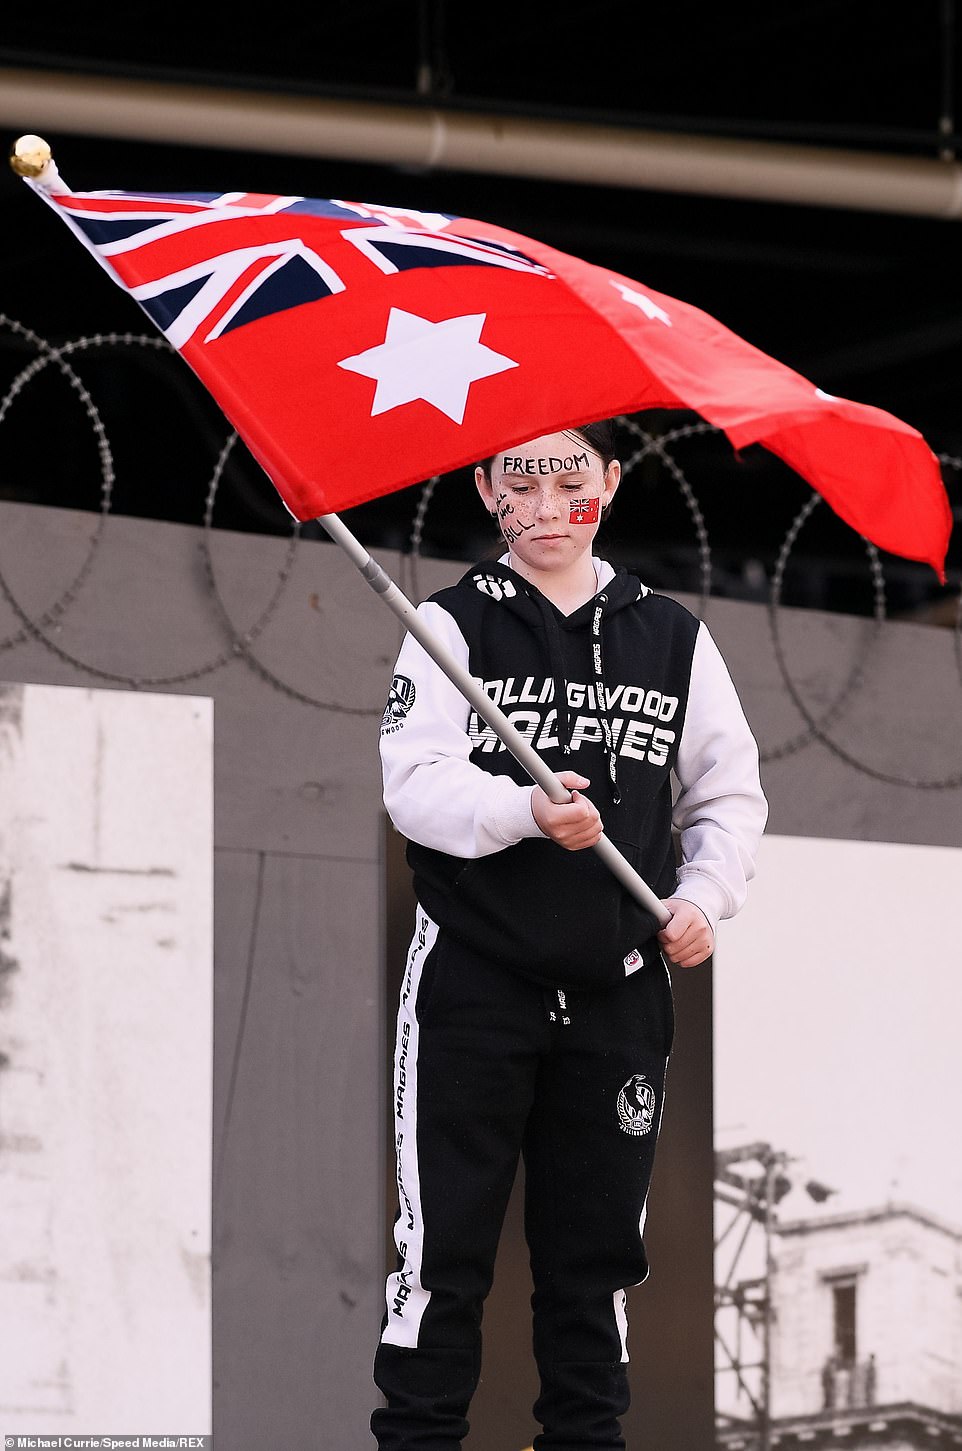 A child is seen holding a flag at the Melbourne CBD Freedom Rally on Saturday